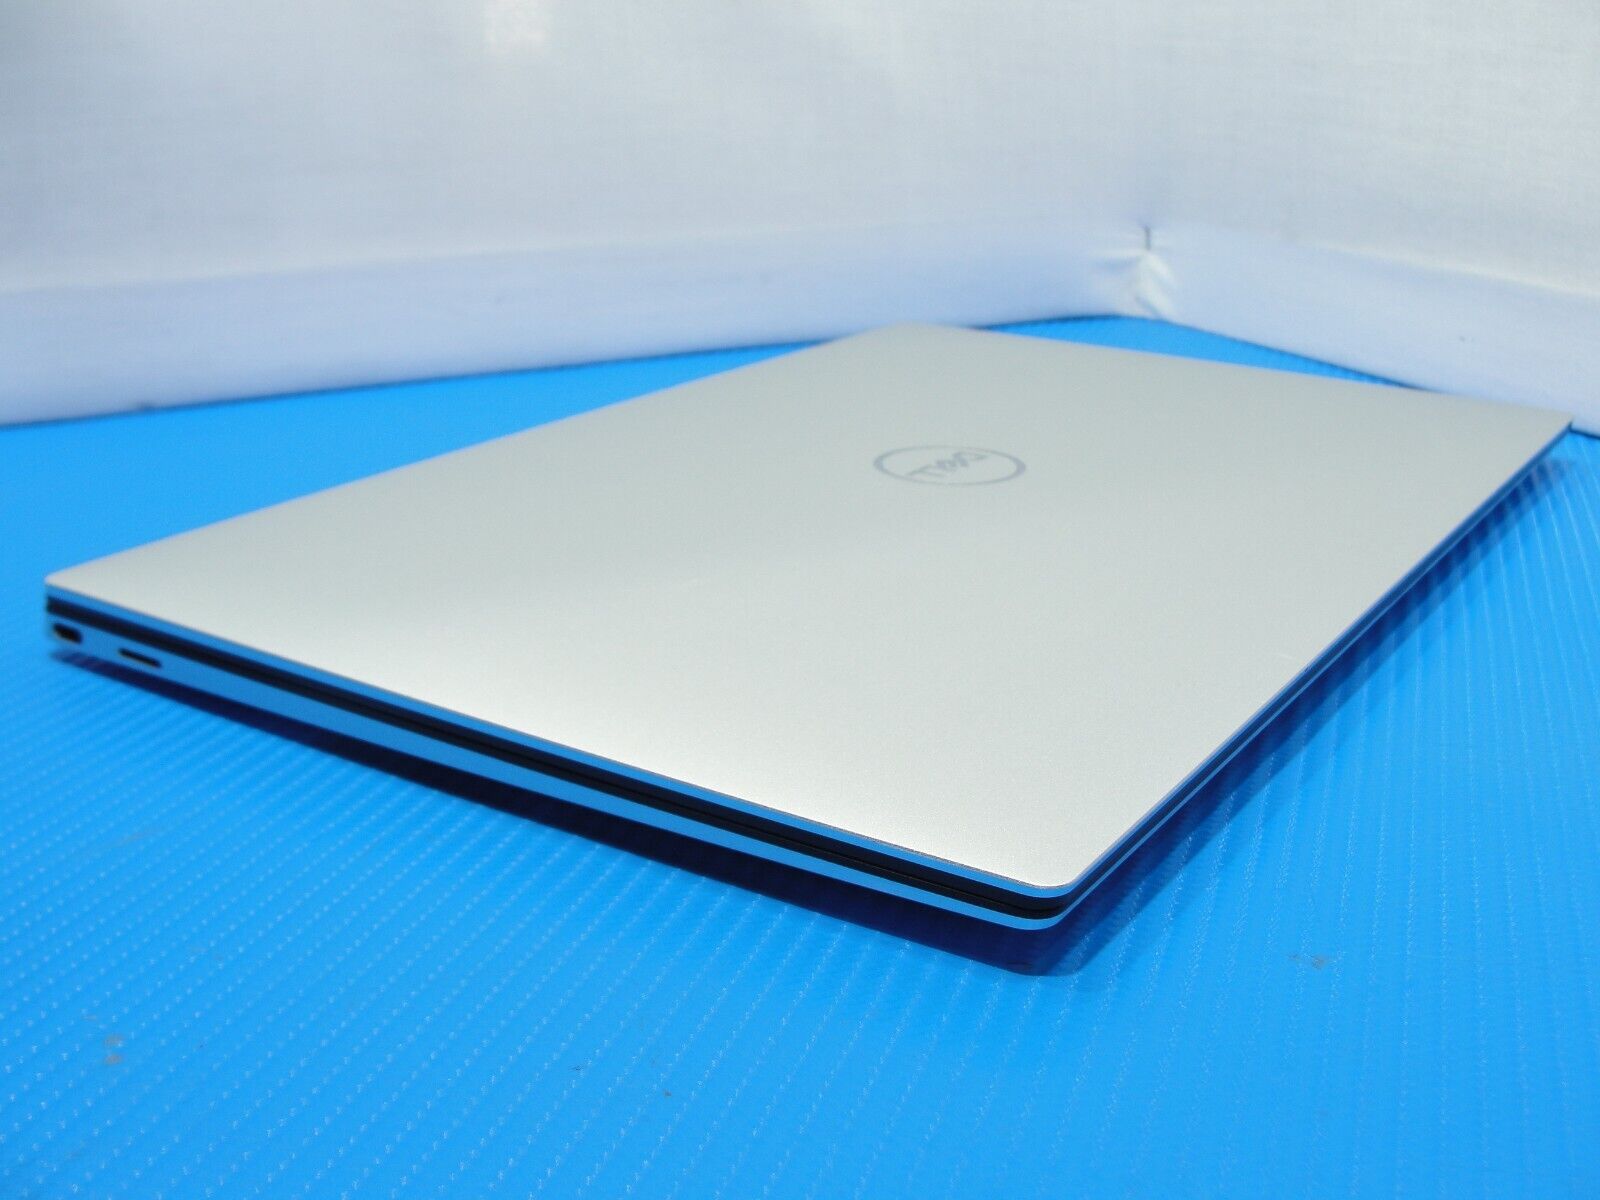 Dell XPS 9300 13